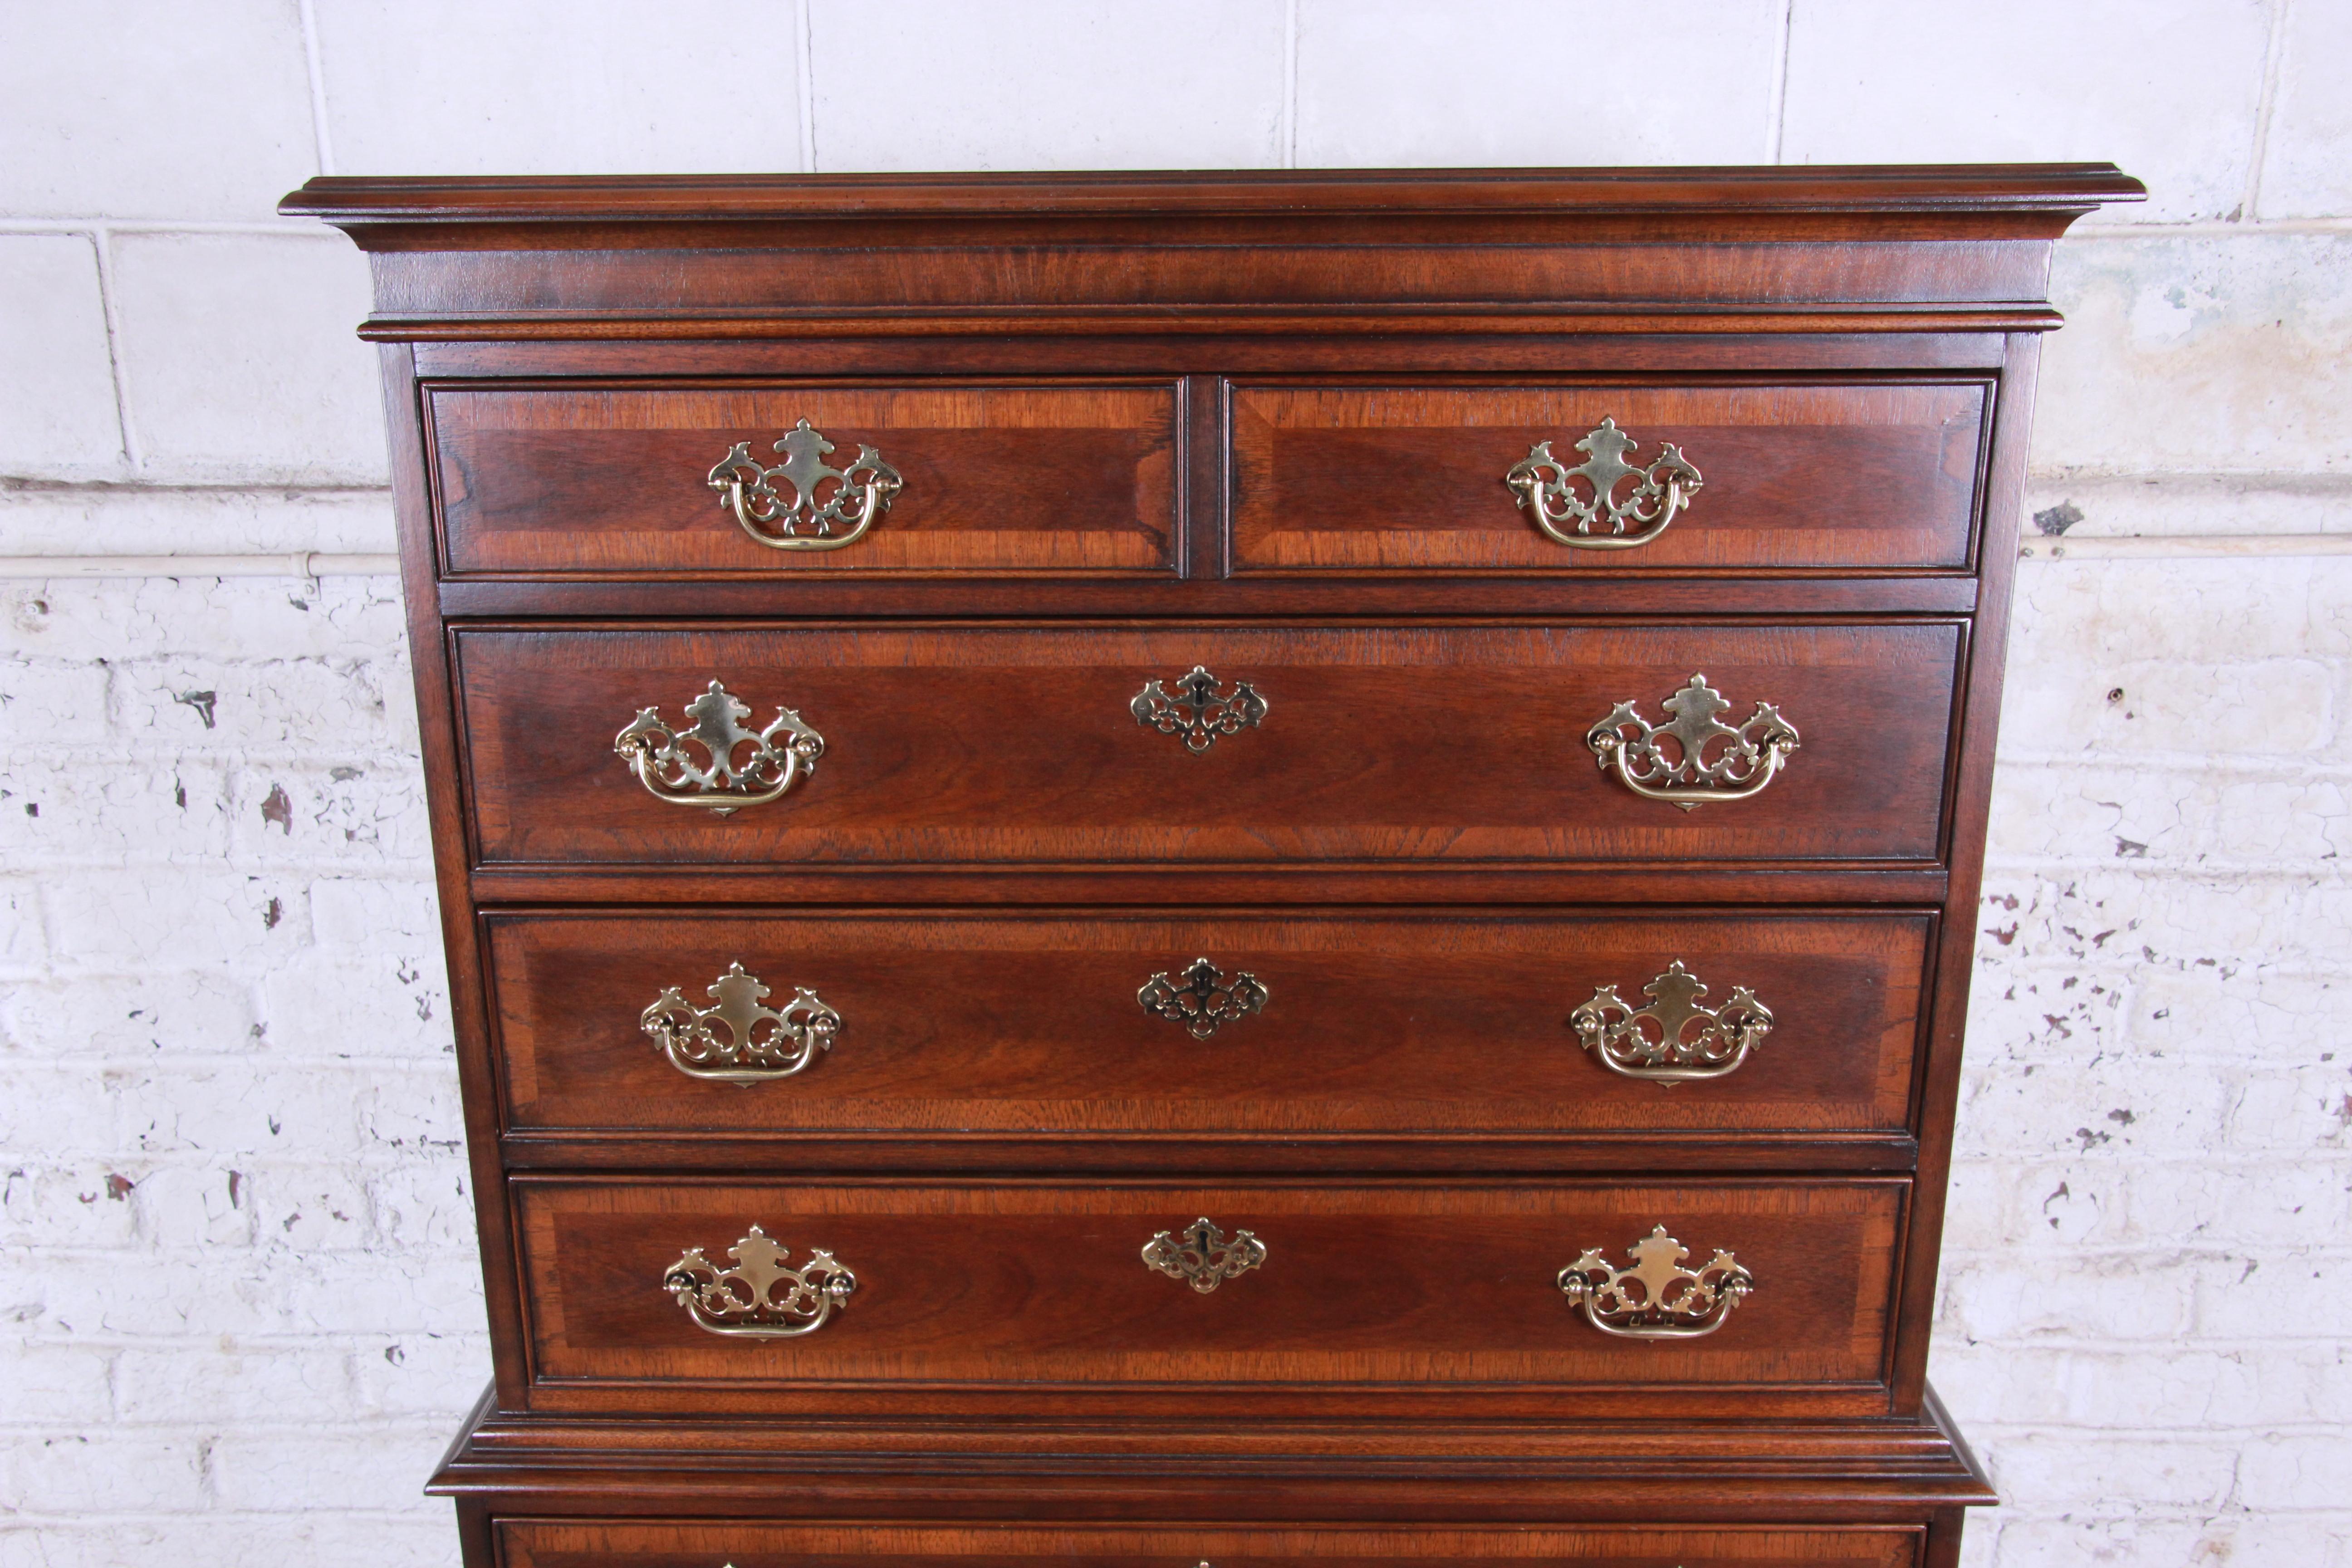 drexel chippendale furniture